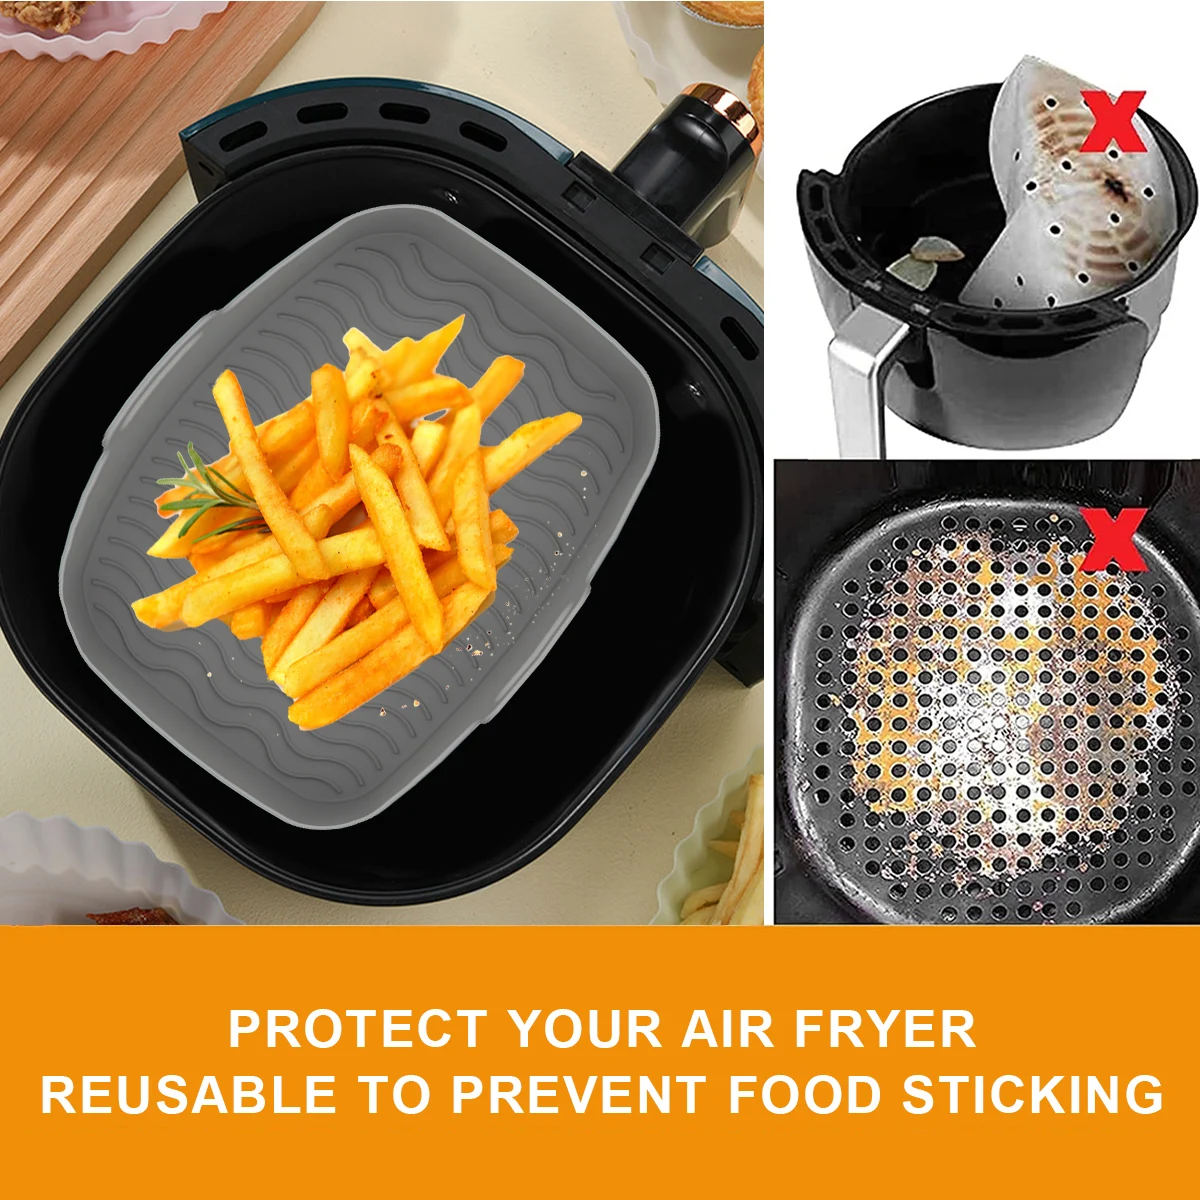 https://ae01.alicdn.com/kf/S7741fe14aa1d4dbbb970db311d8e374aC/2Pcs-Air-Fryer-Silicone-Pot-with-Handle-Reusable-Air-Fryer-Liner-Heat-Resistant-Air-Fryer-Silicone.jpg